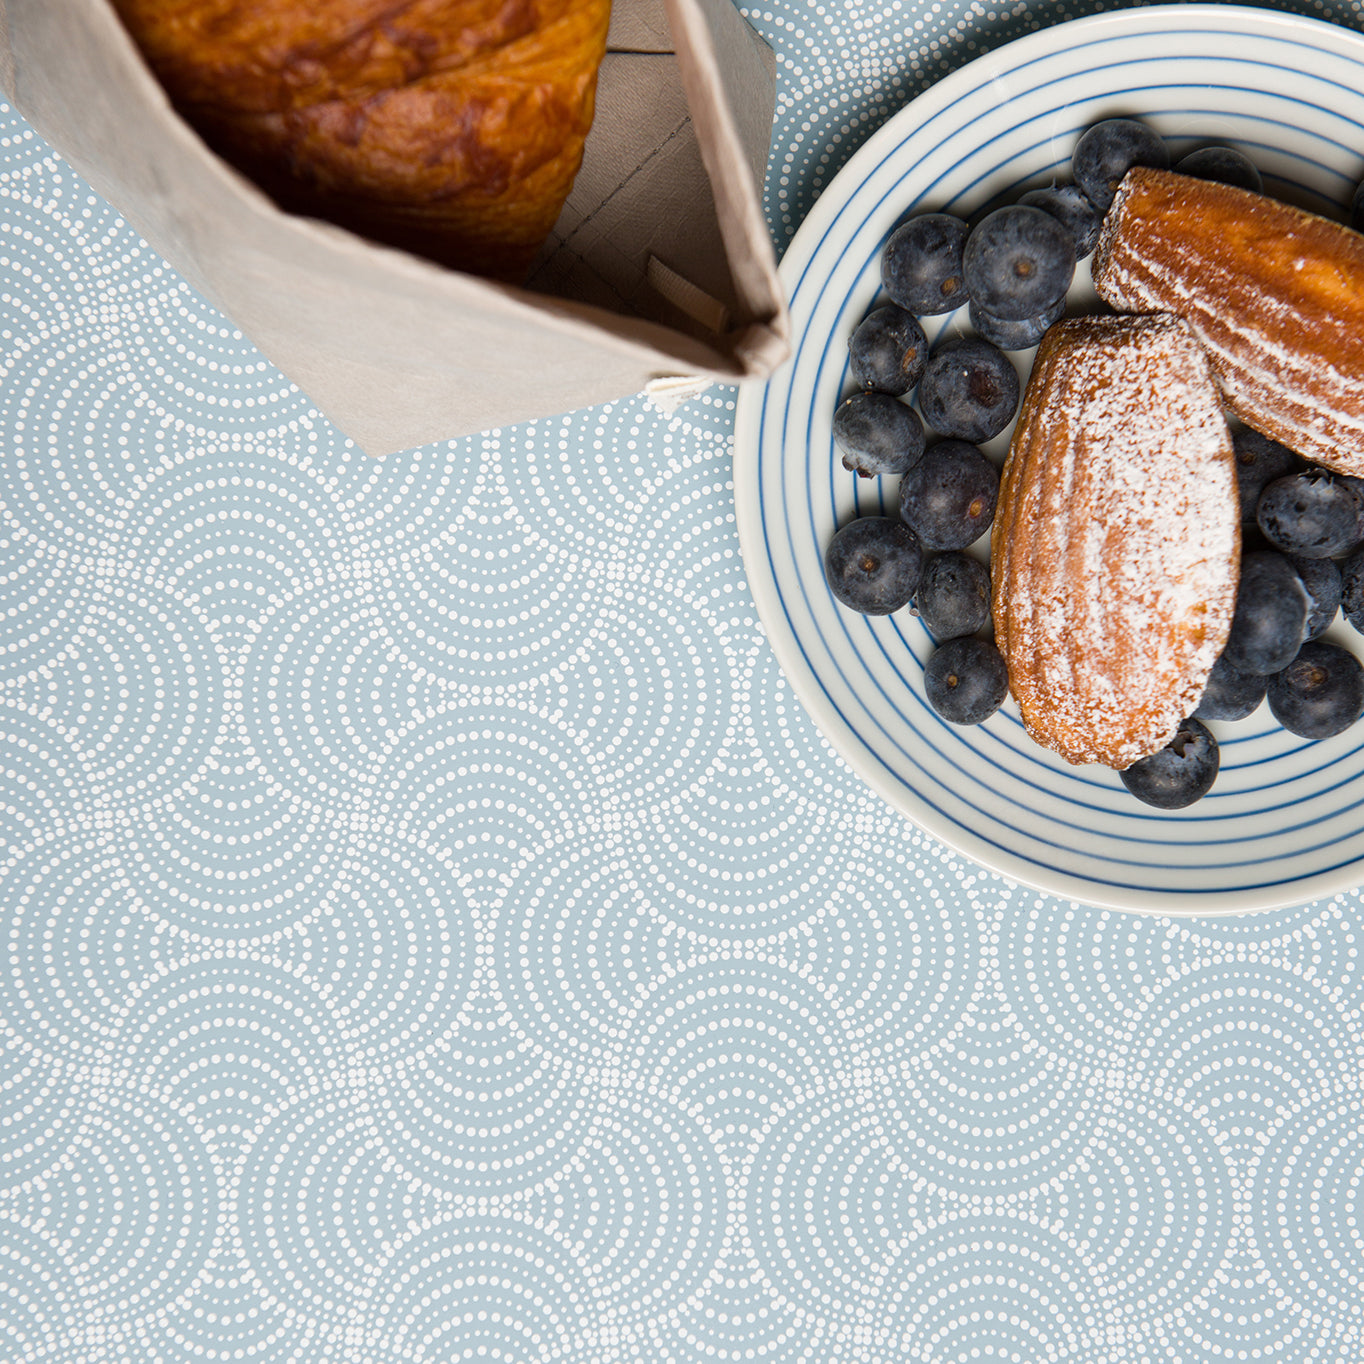 Madeleine cookies and blueberries in bowl on top of placemats with blue line pattern